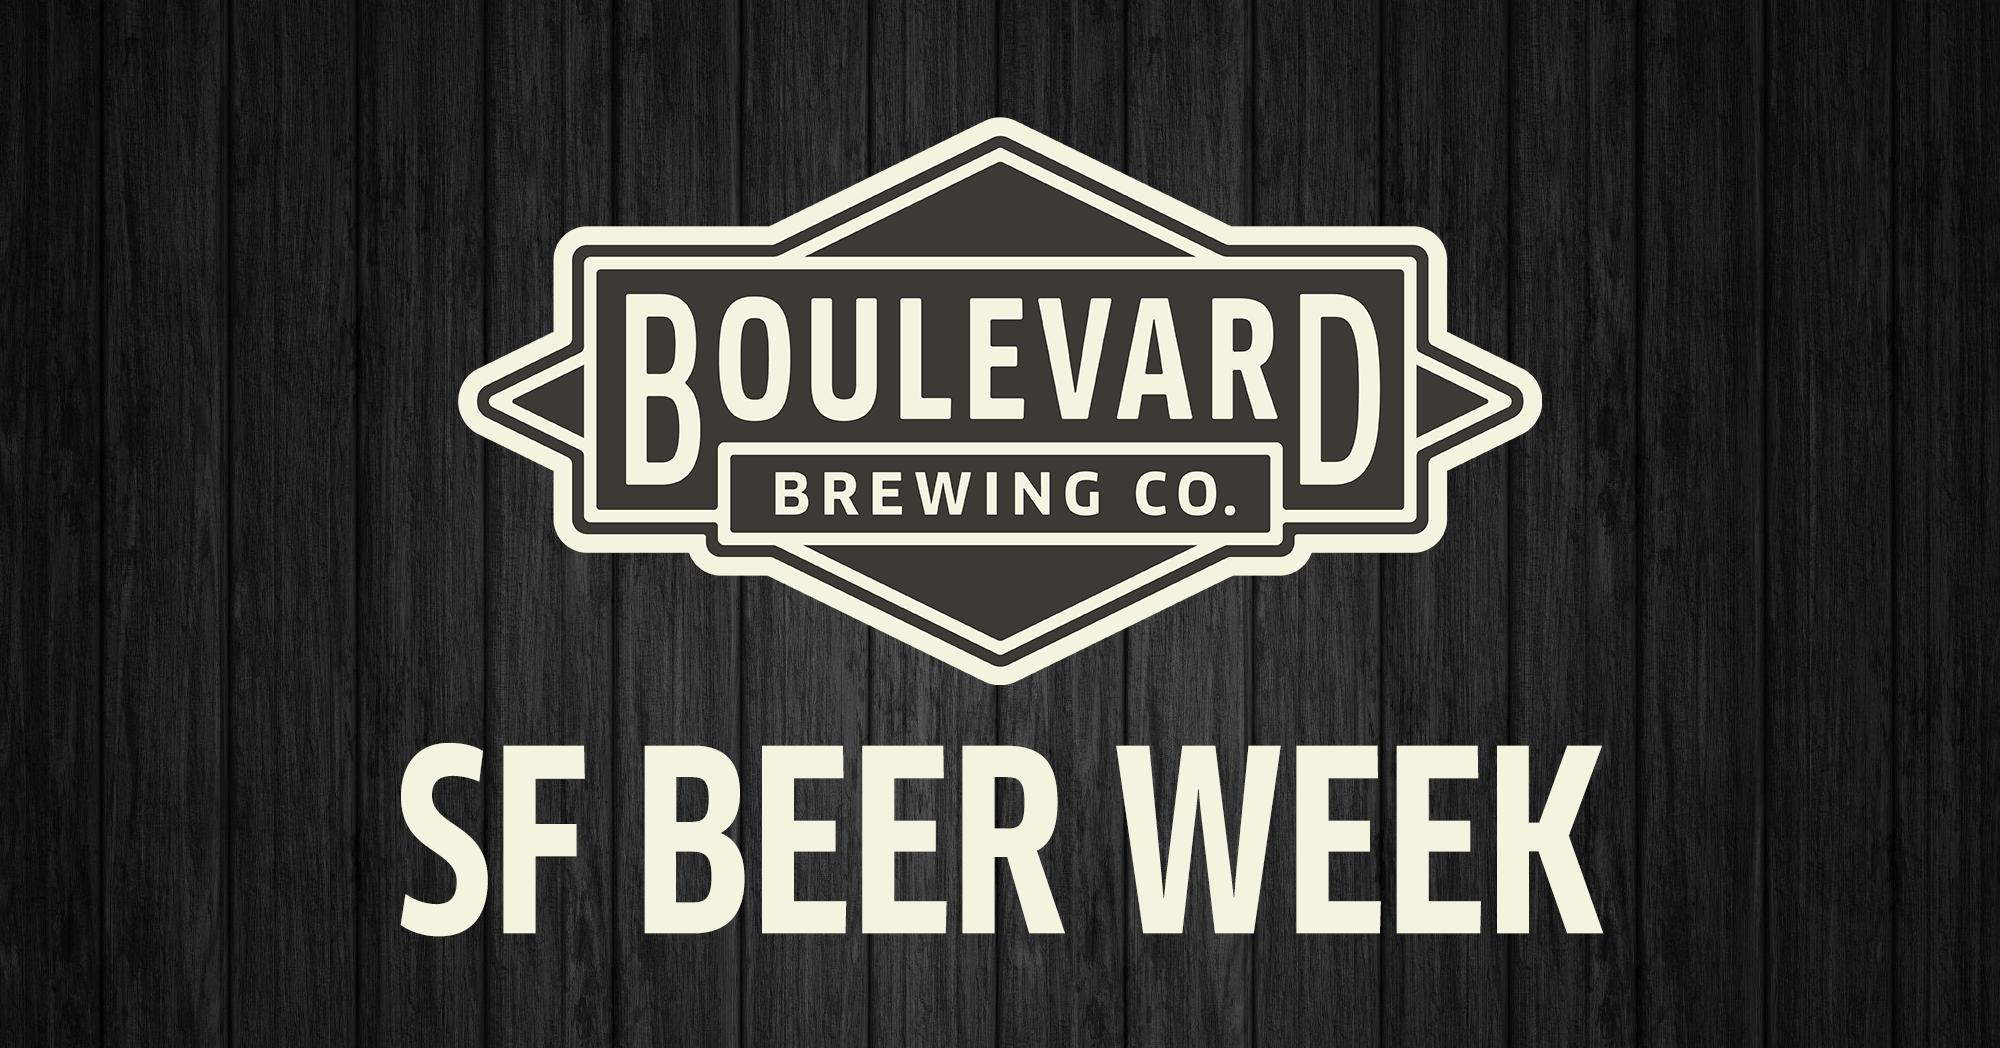 Beers with Boulevard - Bloodhound